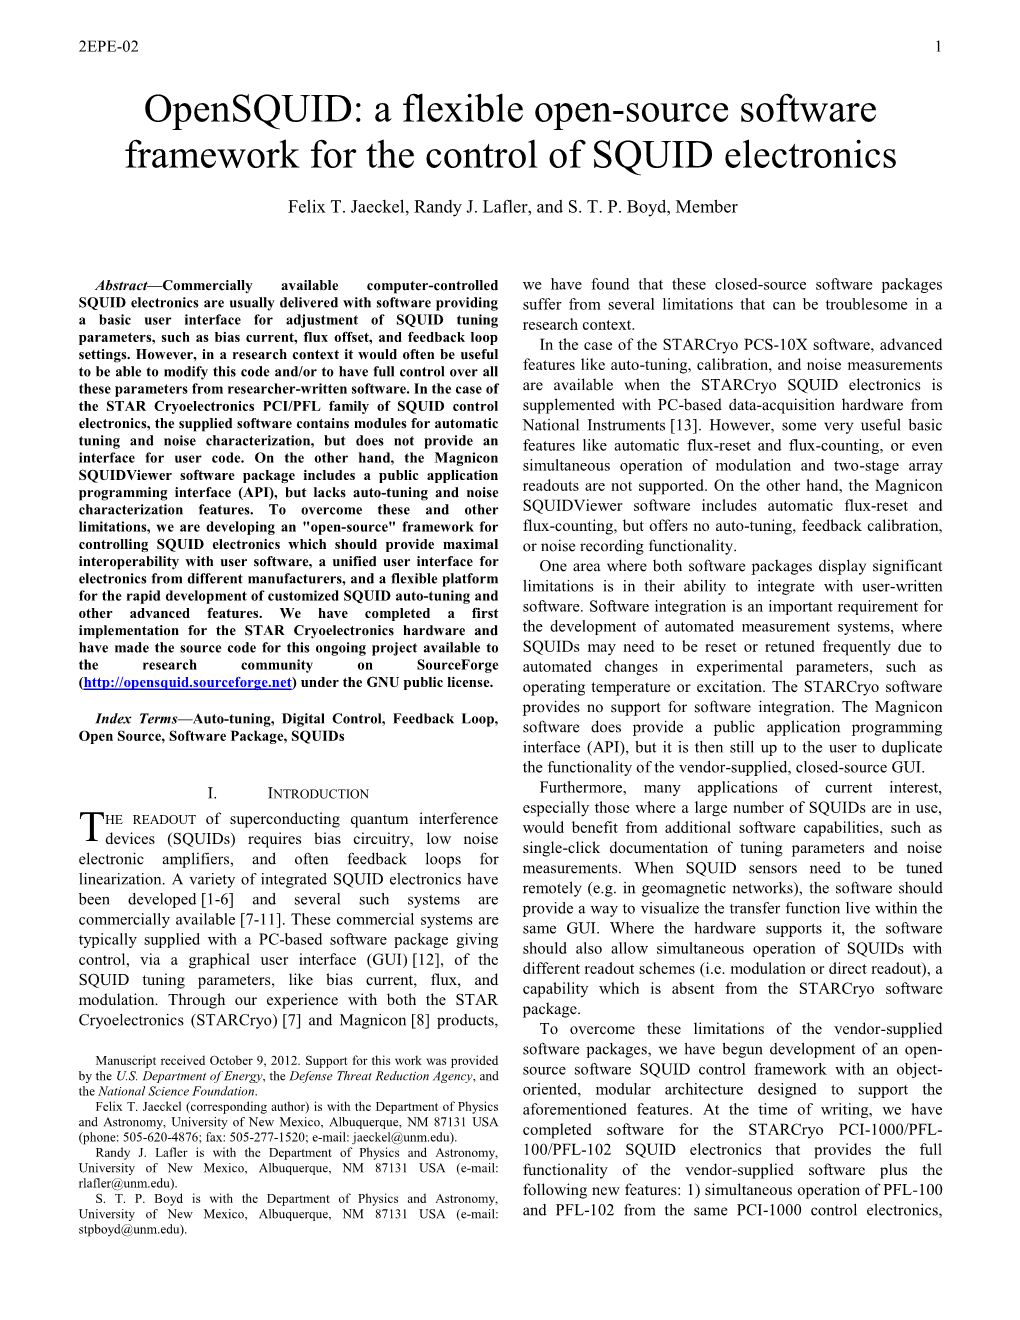 A Flexible Open-Source Software Framework for the Control of SQUID Electronics